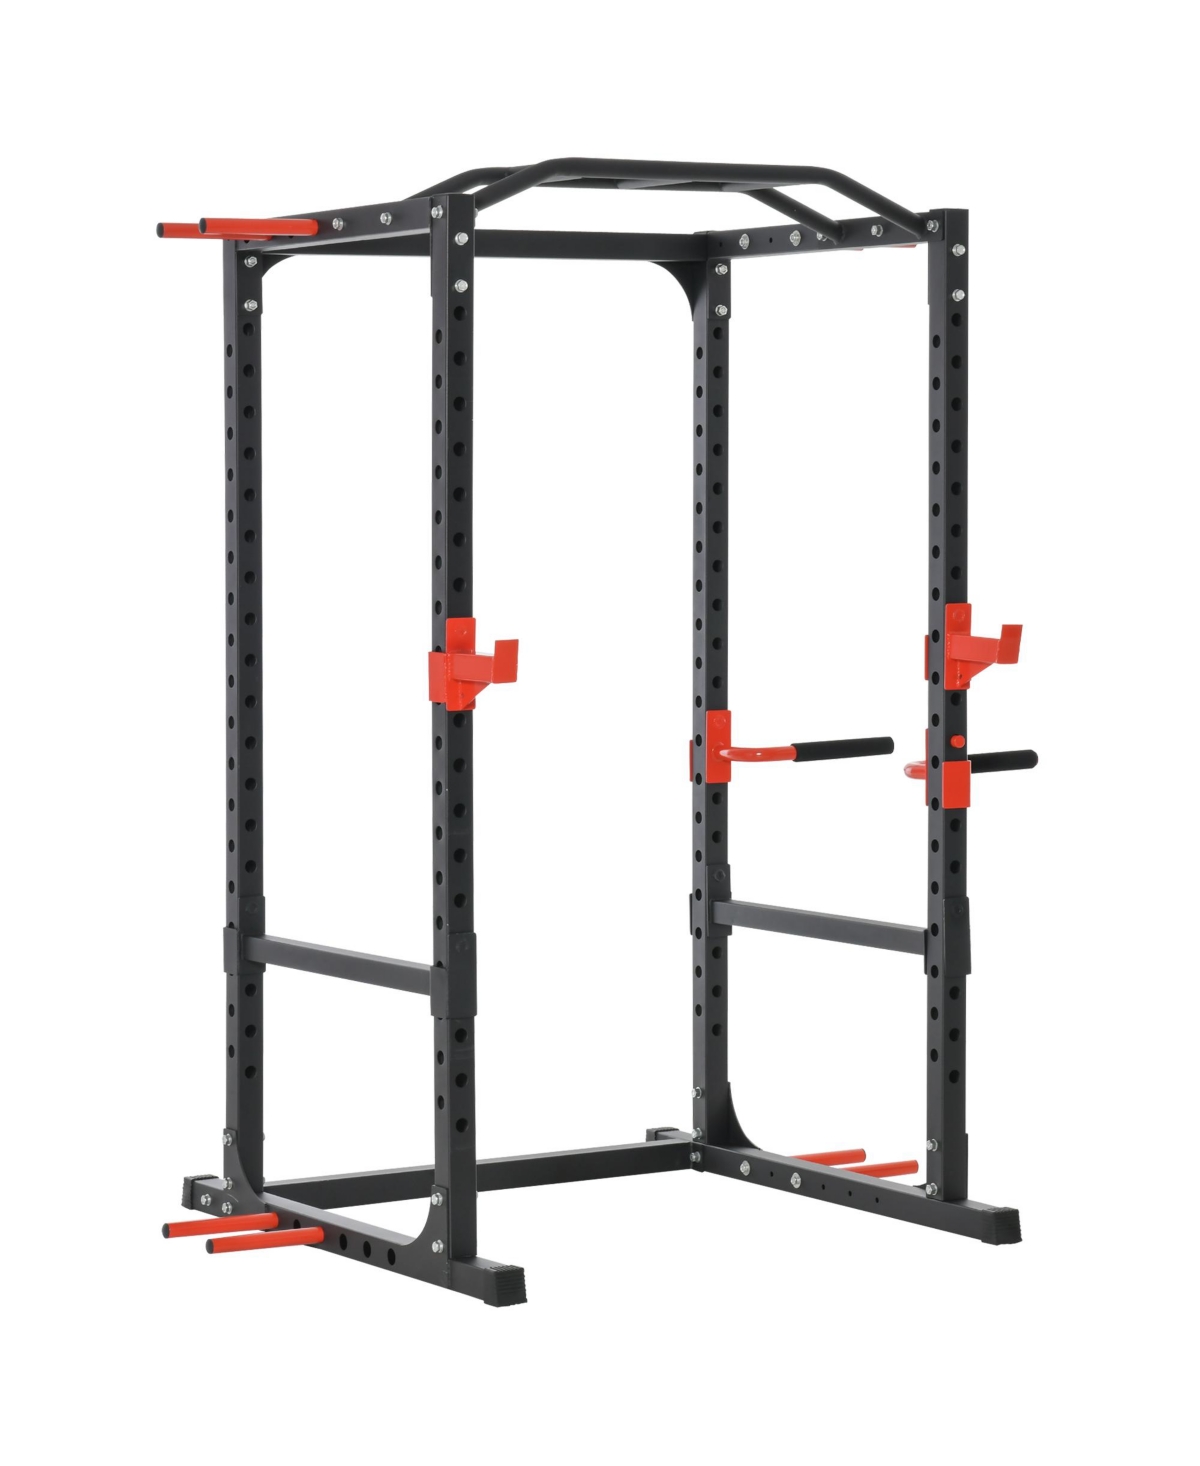 Adjustable Power Tower Dip Station Pull Up Bar Squat Rack Power Cage At Home Workout Equipment, Upper Body Strength Training Equipment - Black